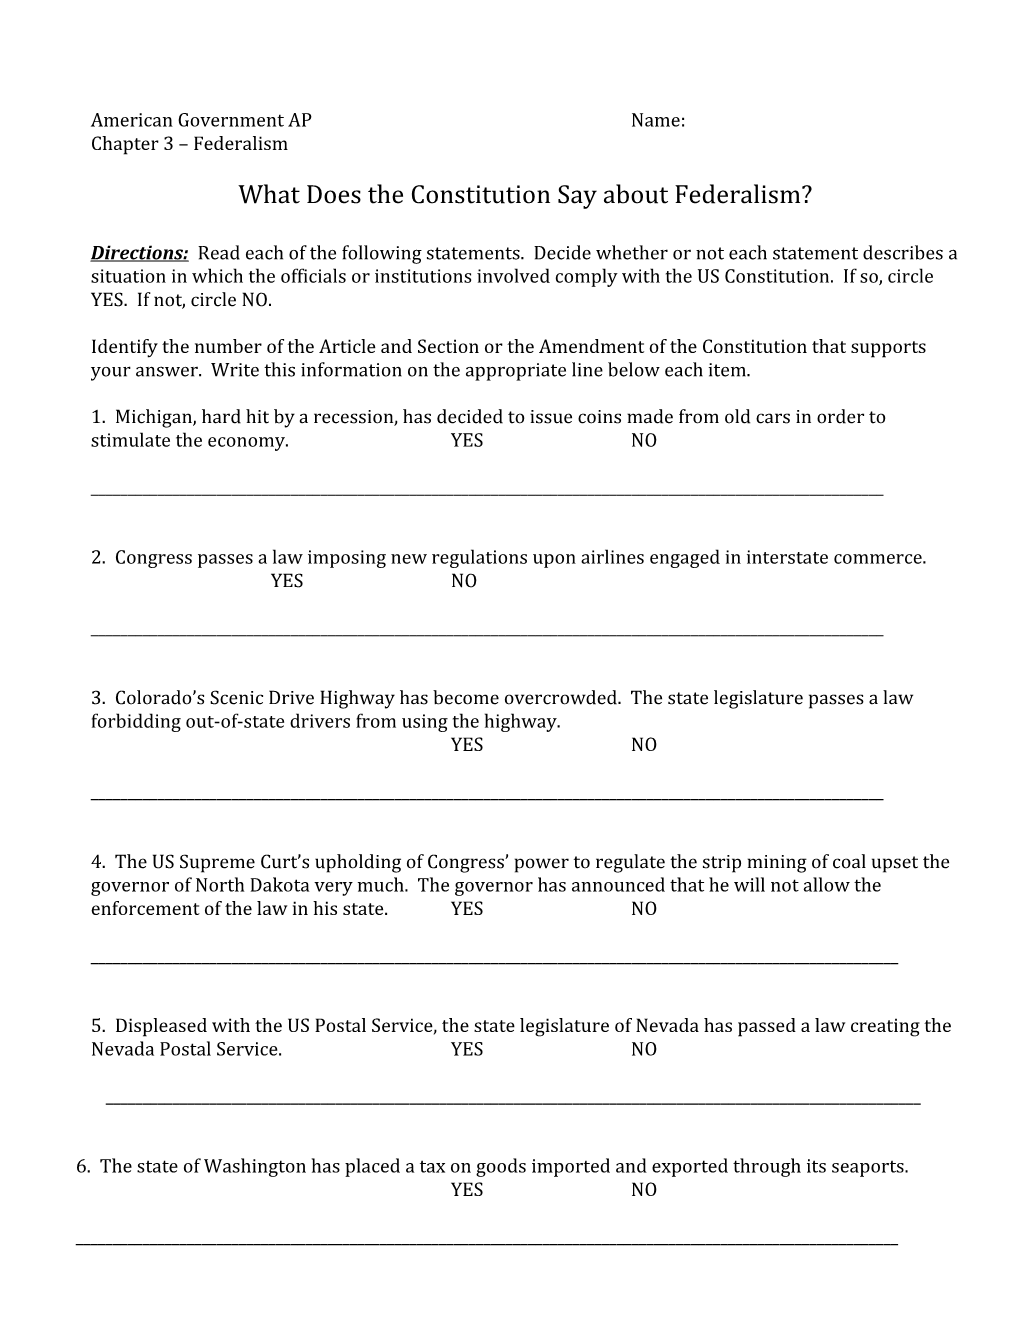 What Does the Constitution Say About Federalism?